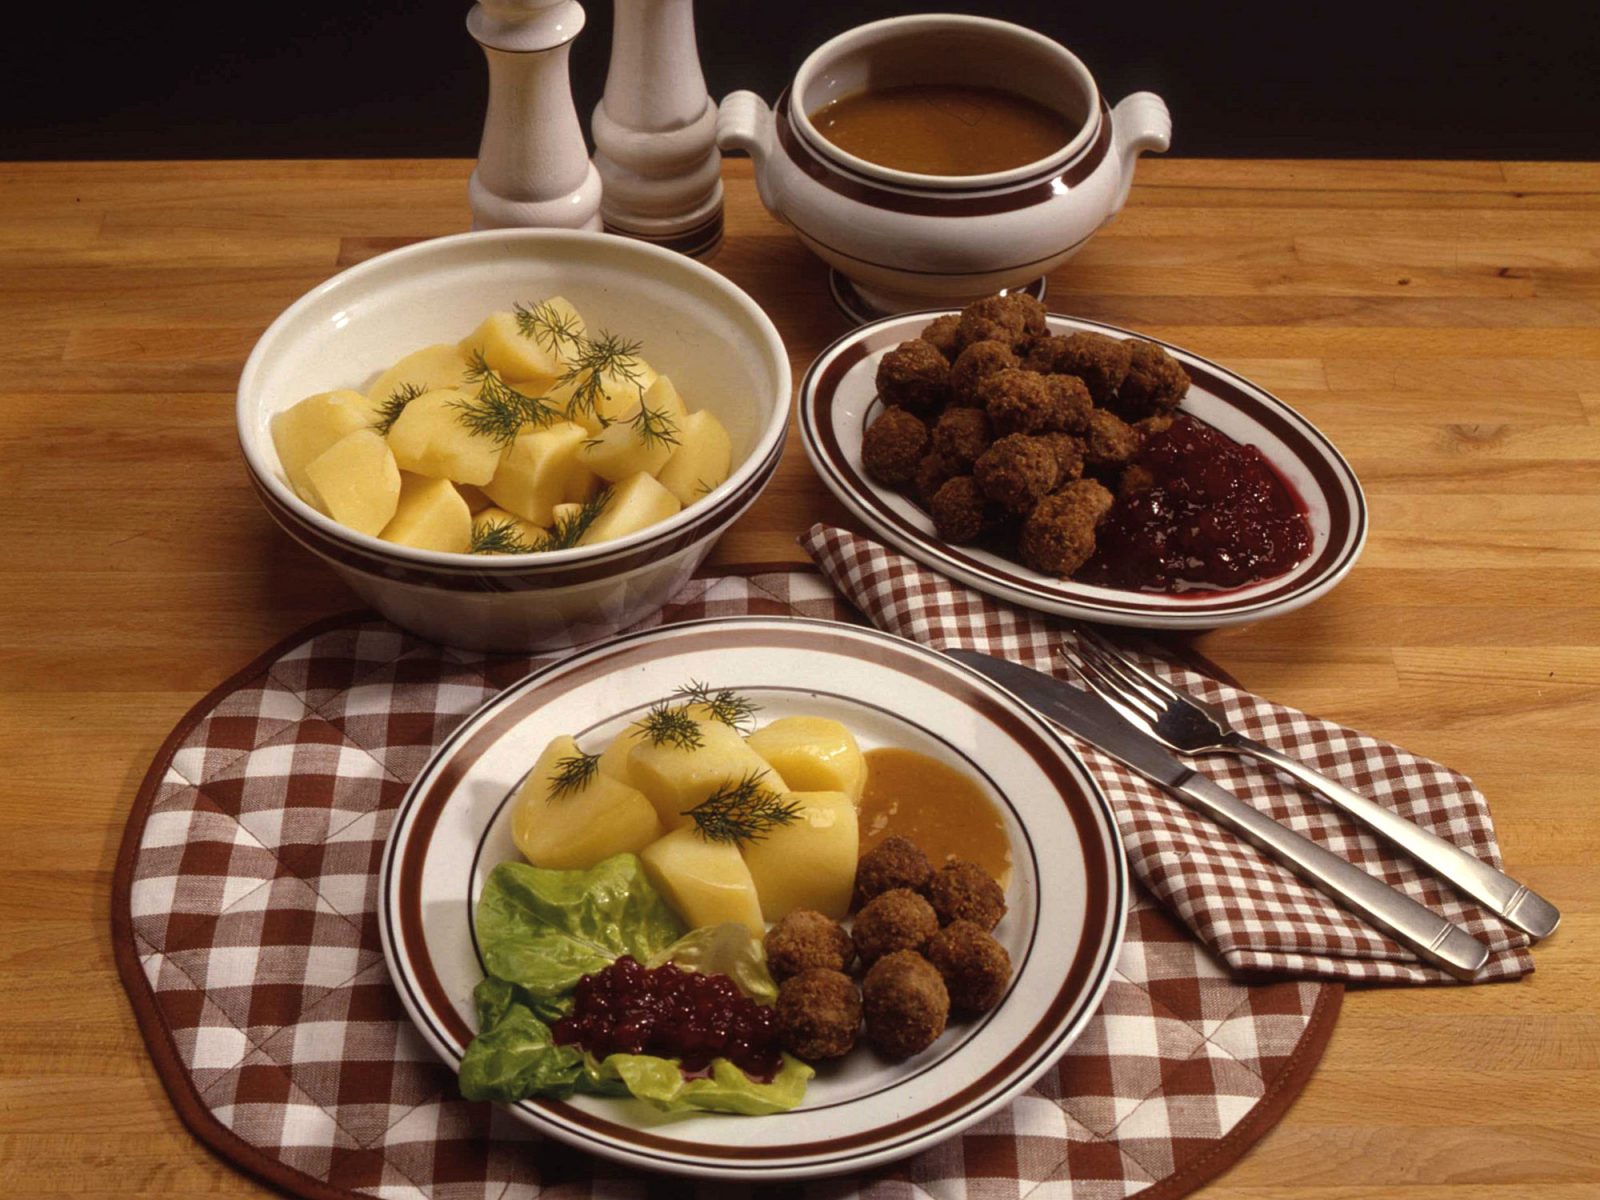 A plate and serving bowls with Swedish meatballs, boiled potatoes, brown sauce and lingonberry jam.